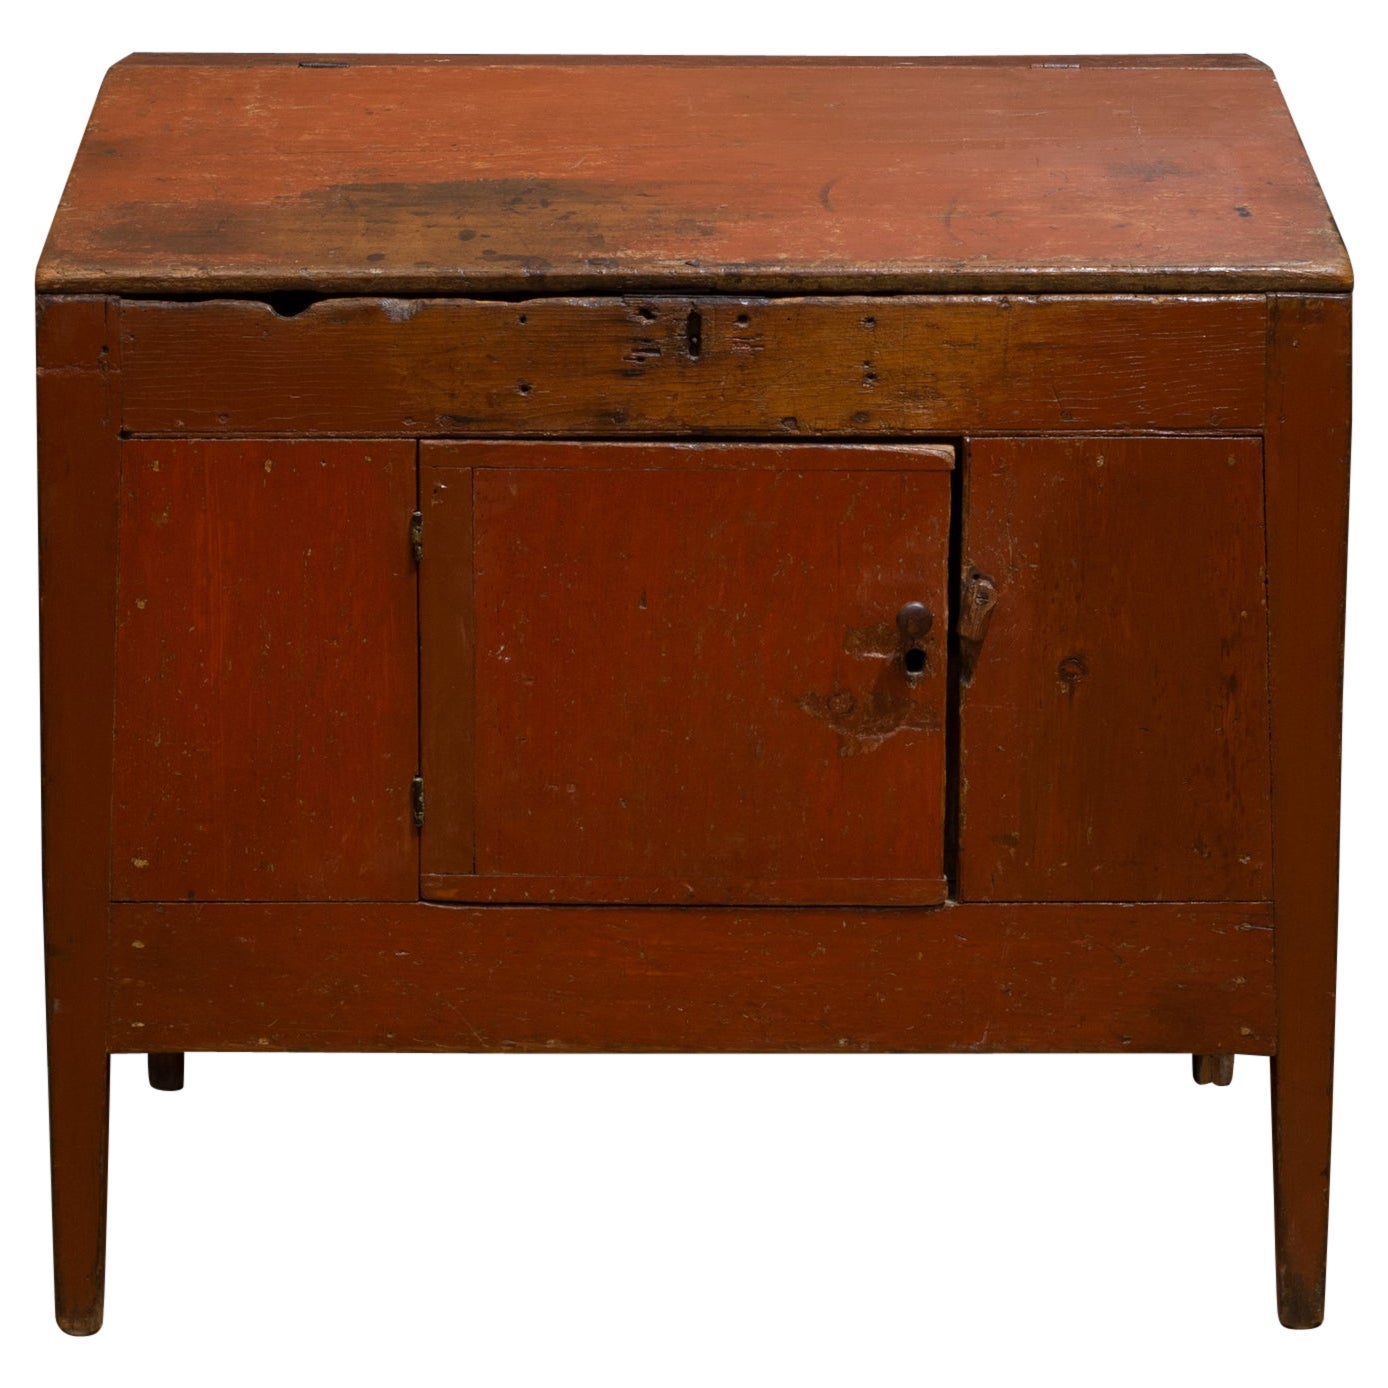 Early-Mid 19th c. Hand Painted Slant Desk, c.1820-1840 For Sale